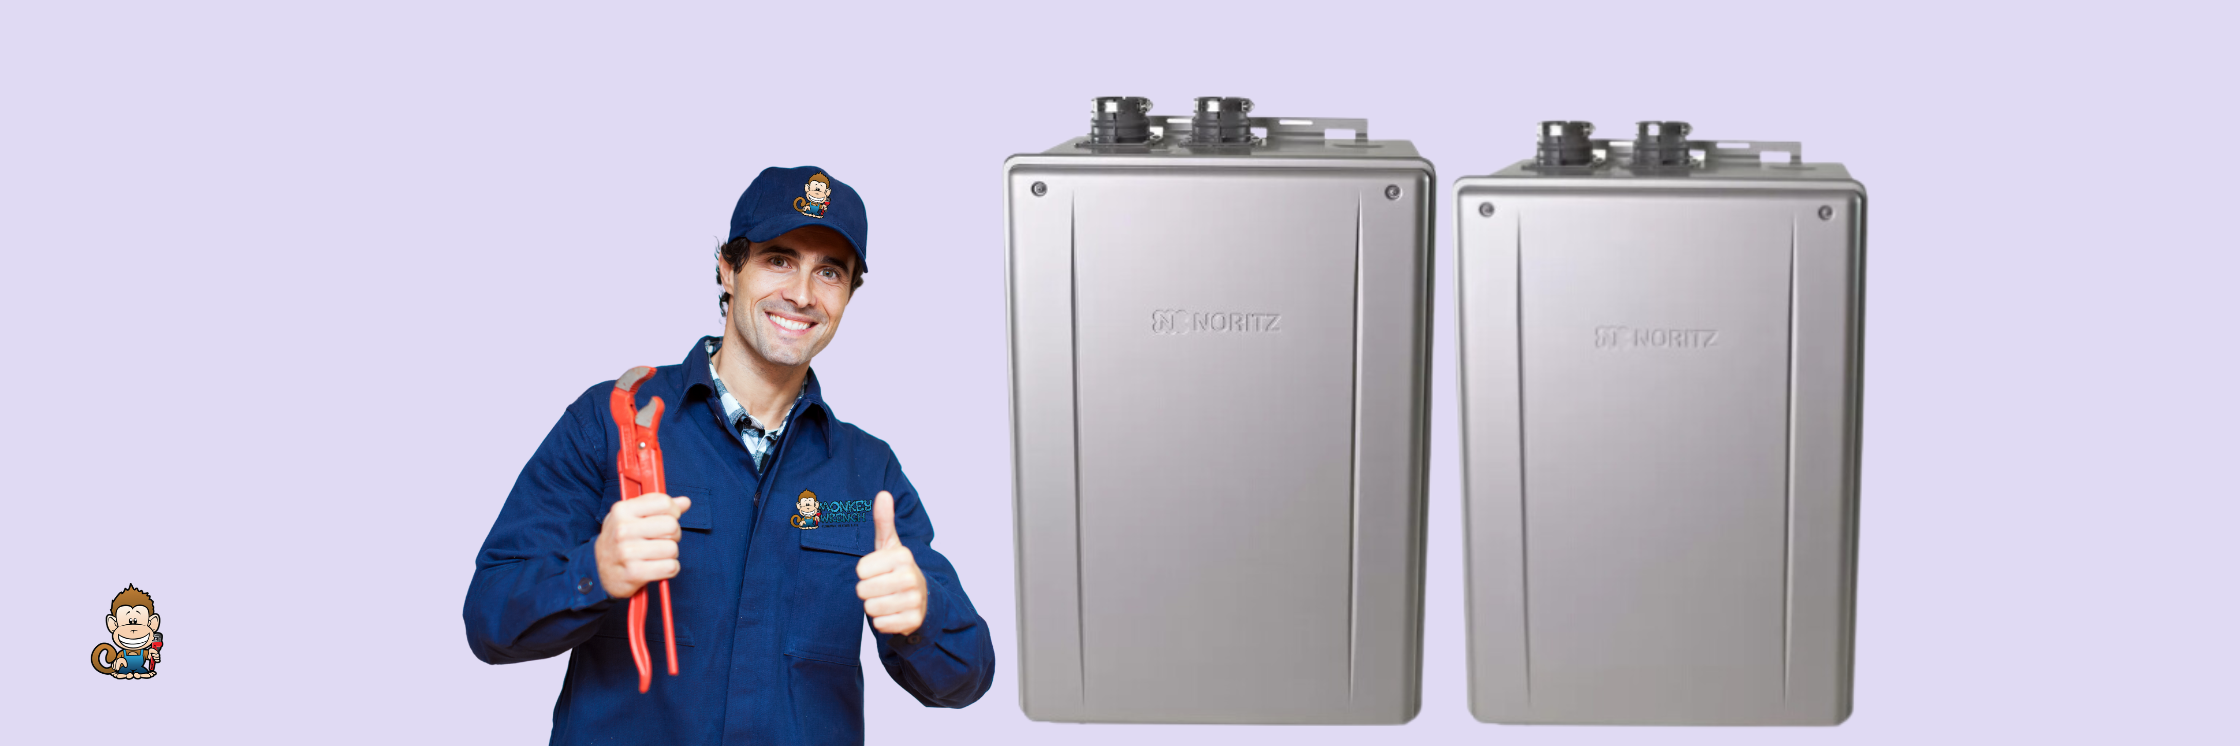 Noritz Model Review: NRCR Tankless Water Heaters